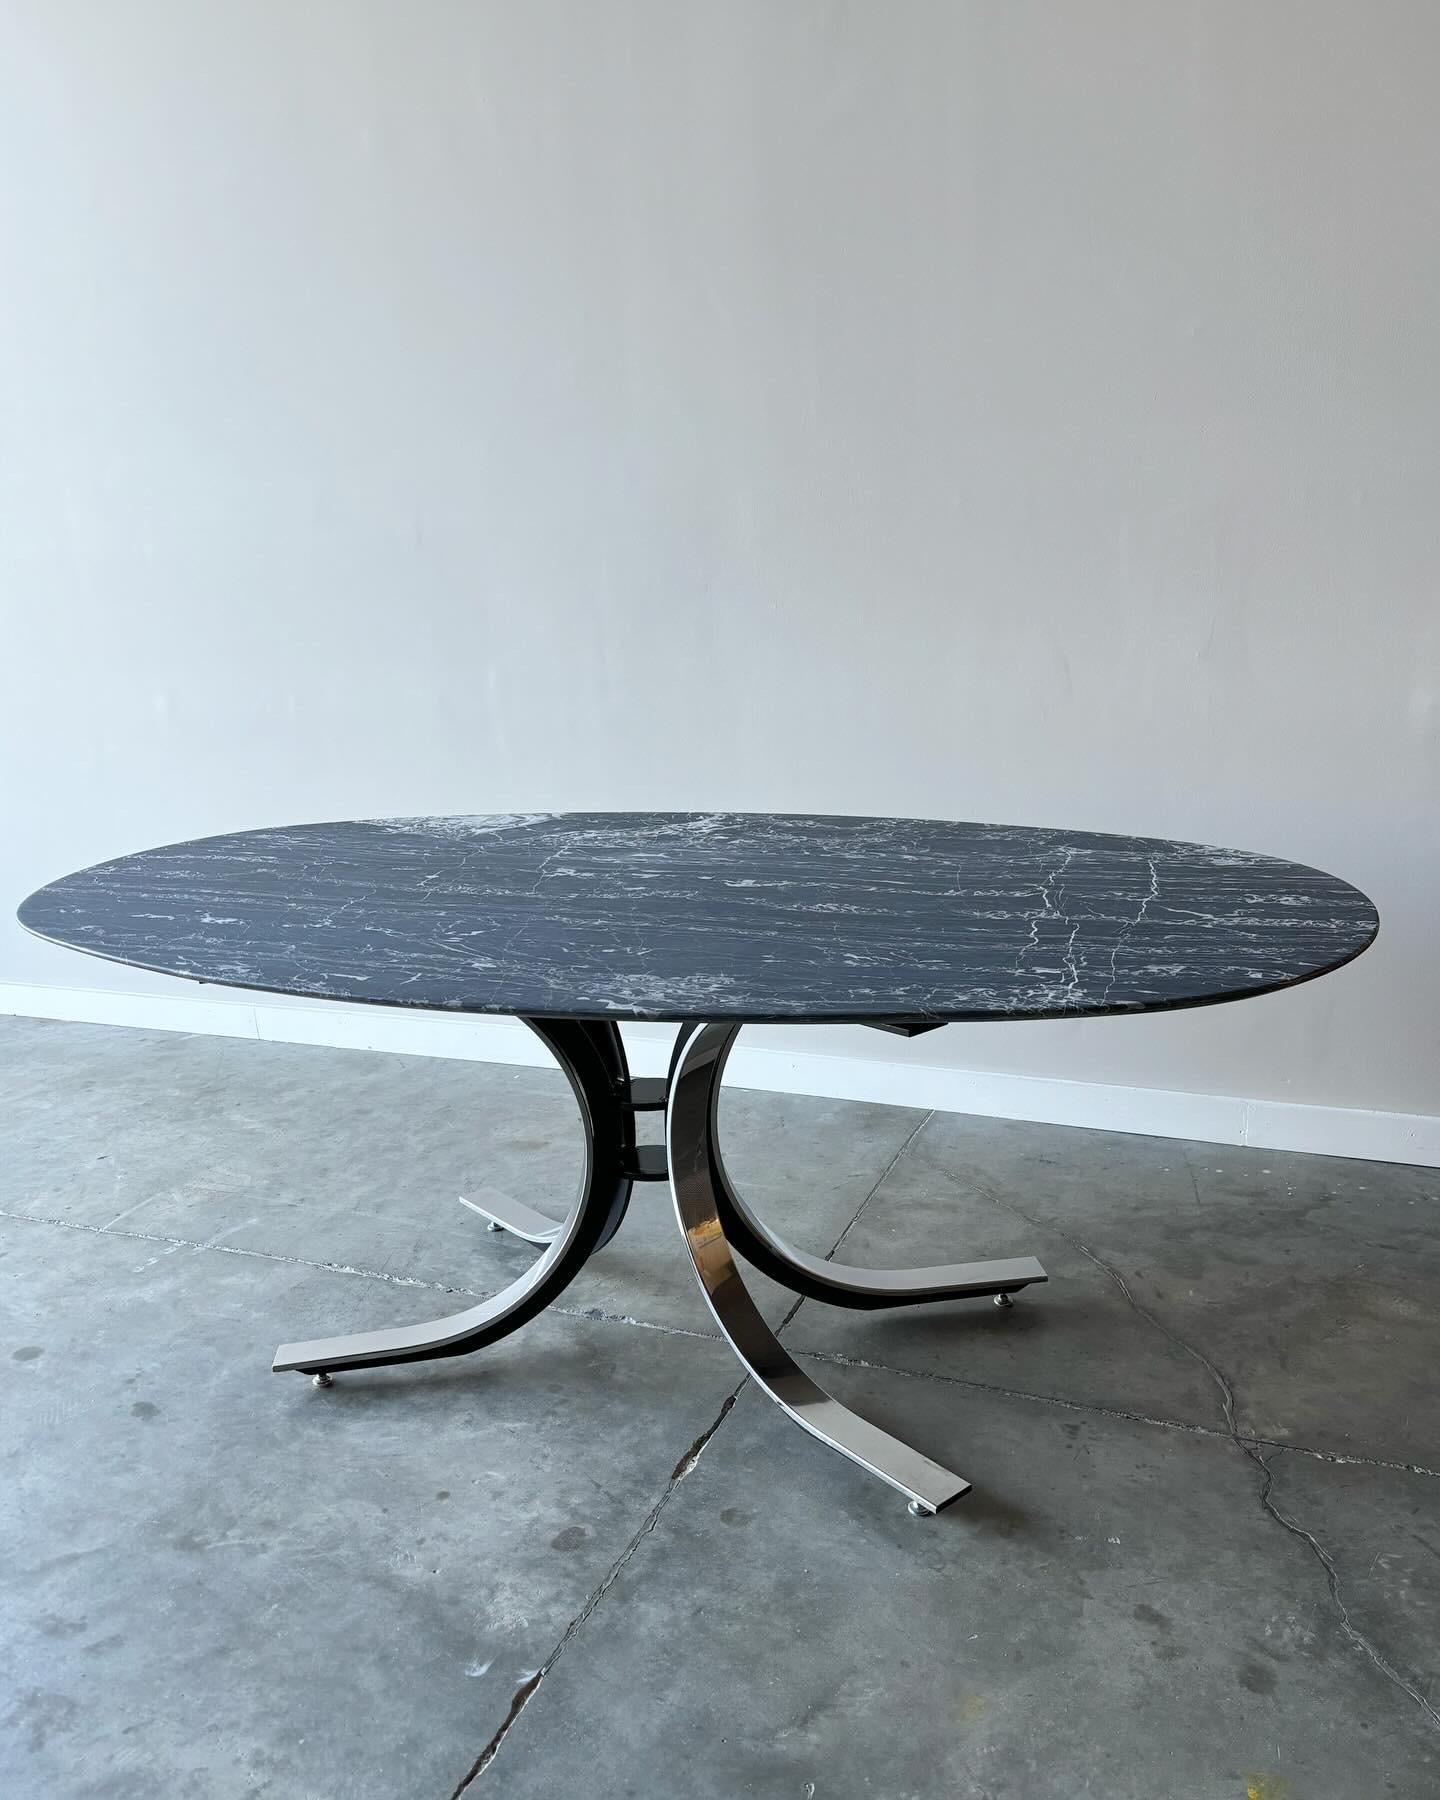 A striking vein pattern to this graphite marble over steel base.  An original Stow Davis table base by Osvaldo Borsani retrofitted with a vintage marble top.  Top is newly refinished to a soft burnished finish.  

